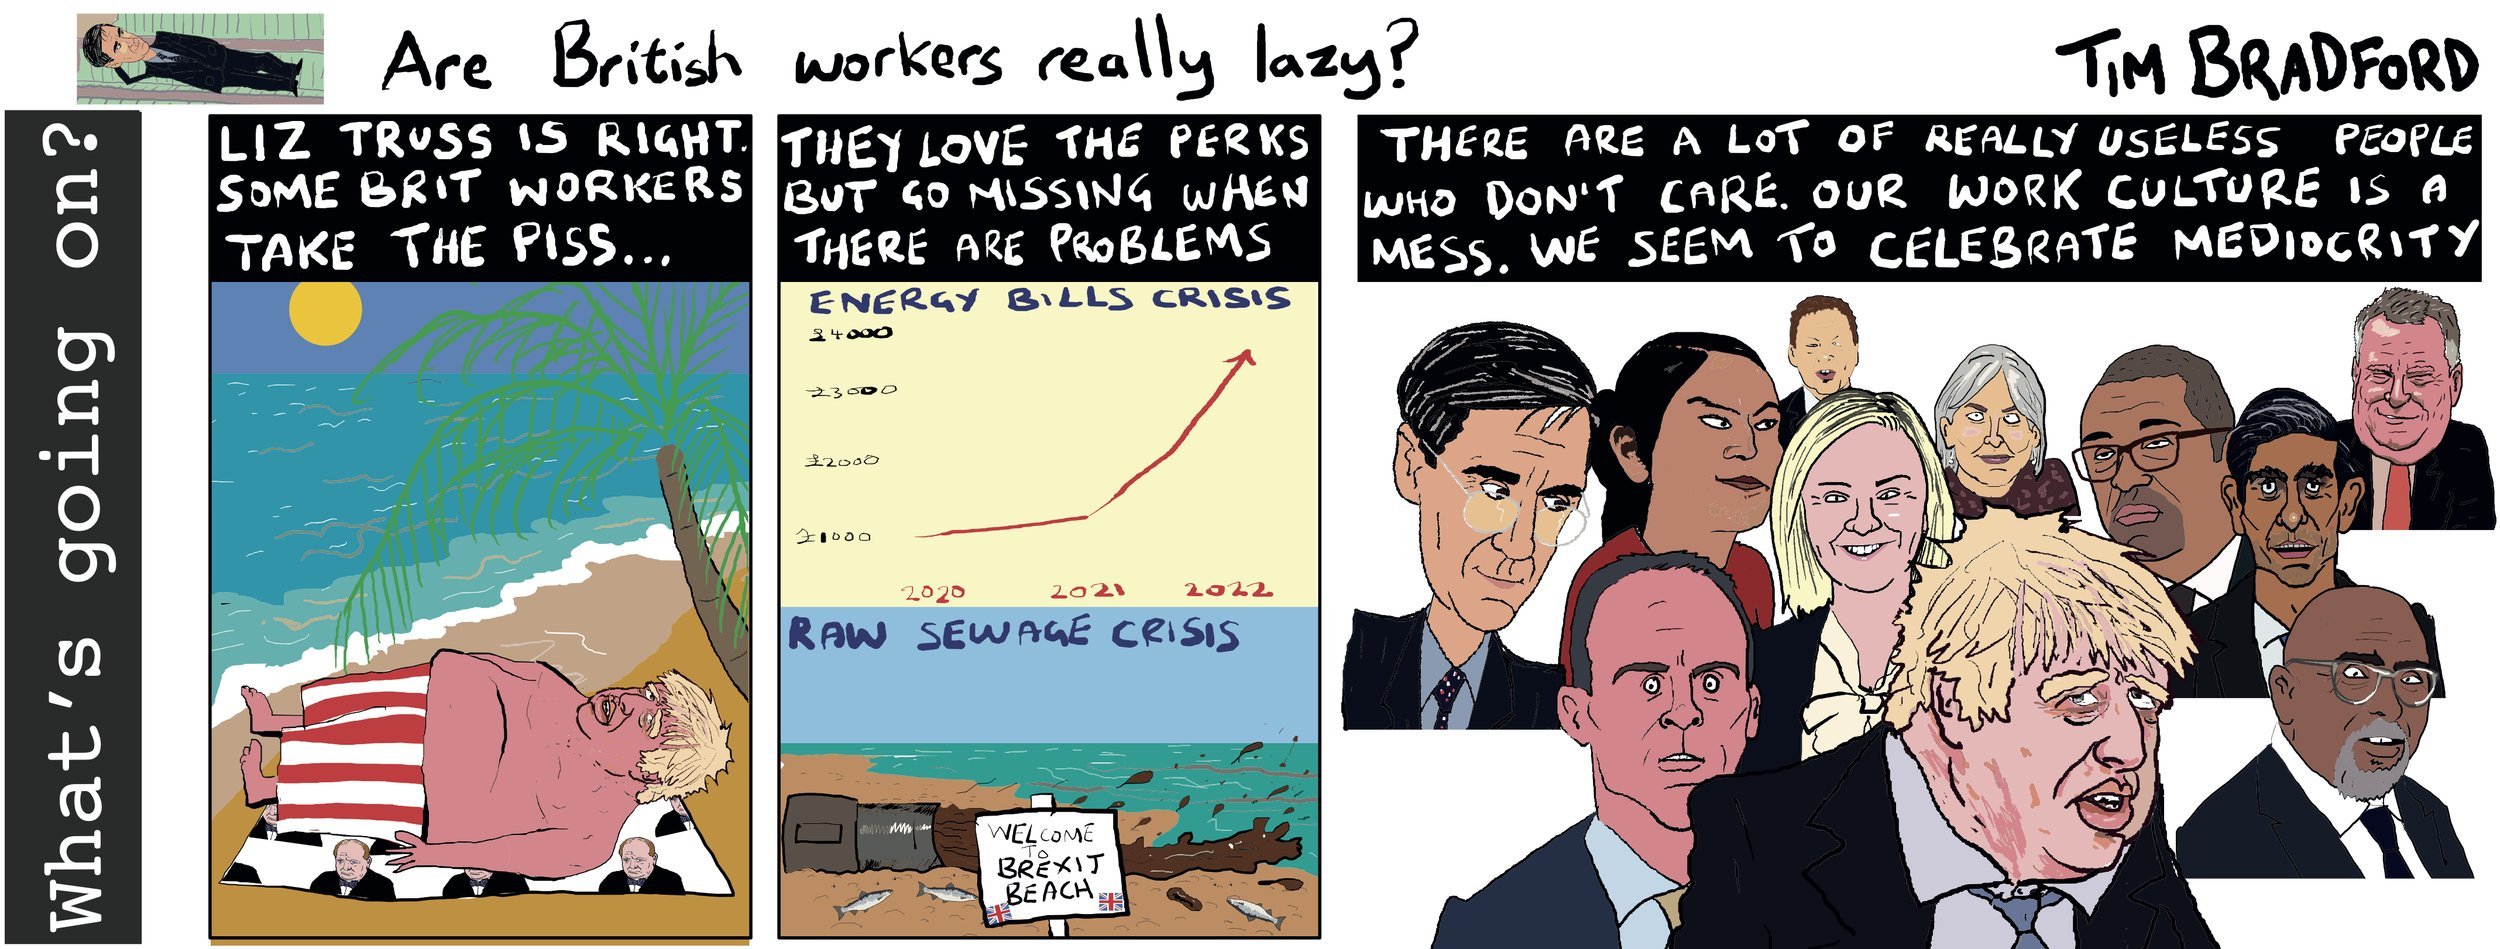 Are British workers really lazy? - 19/08/2022